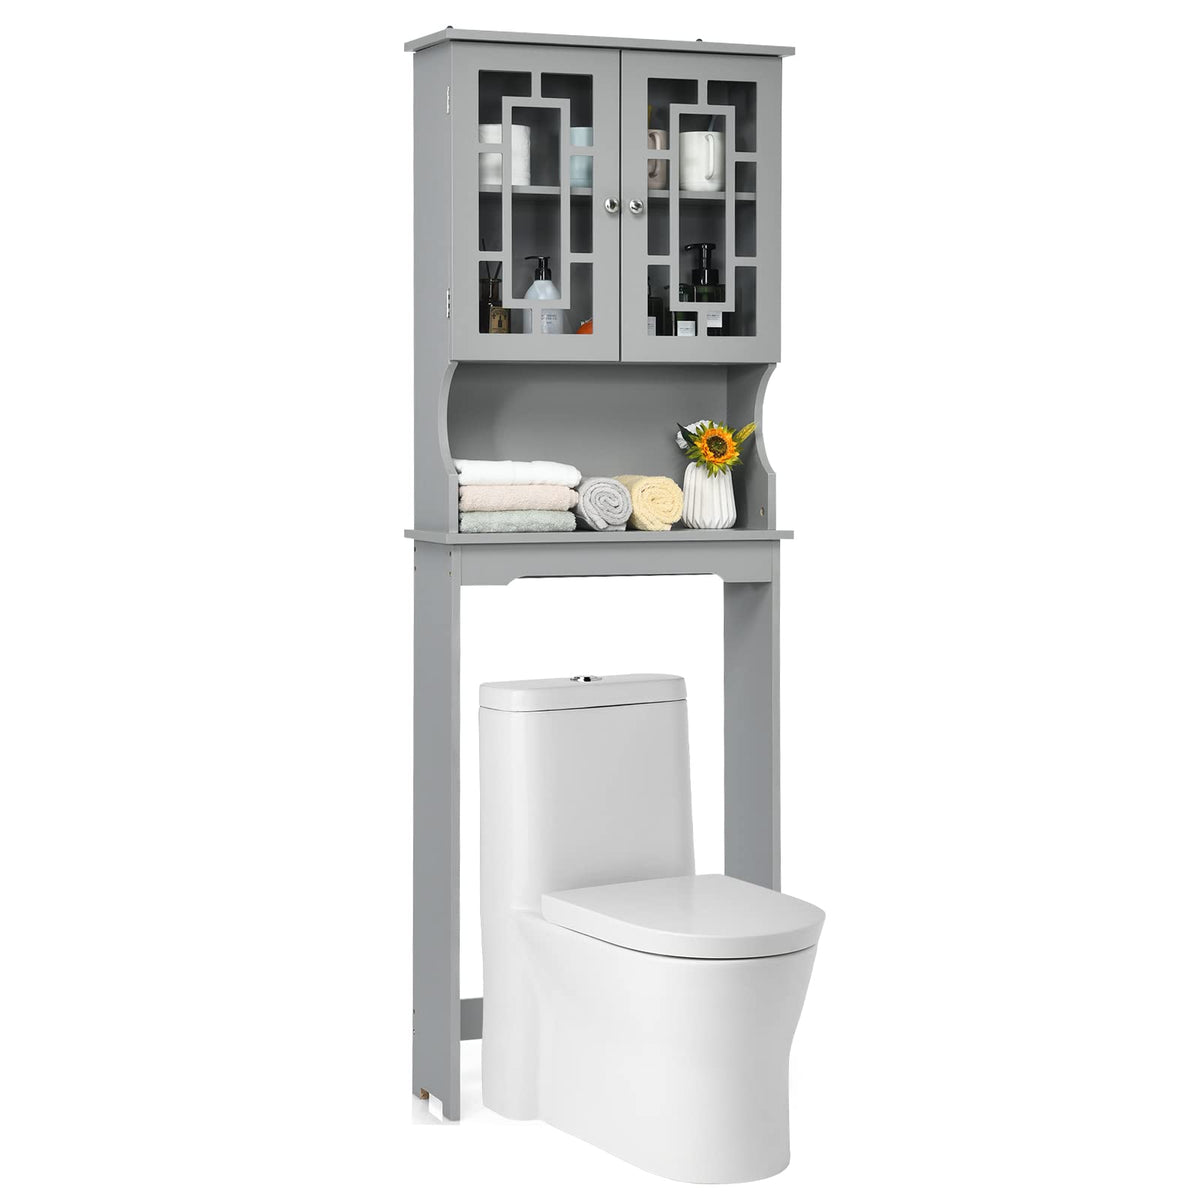 Giantex Over-The-Toilet Storage Spacesaver, Bathroom Organizer with Cabinet  and Shelf, Above Toilet Standing Rack (White)